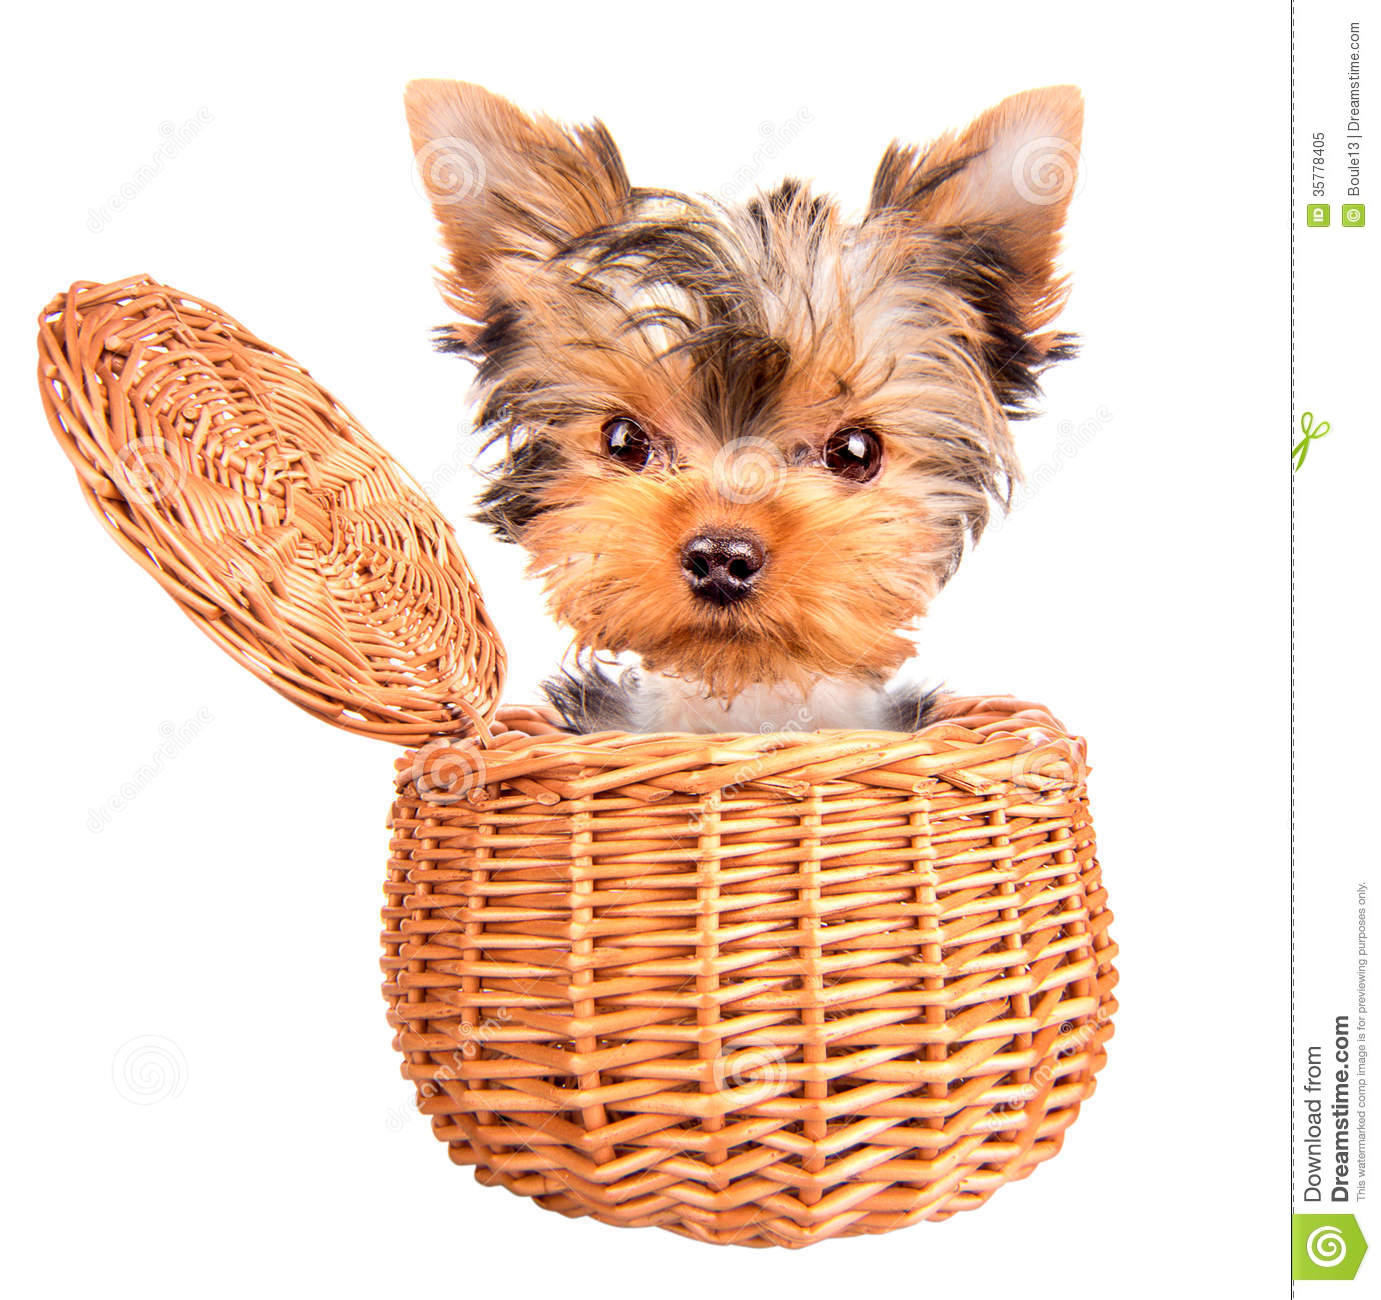 Happy Yorkie Toy Standing In A Basket Royalty Free Stock Photo   Image    